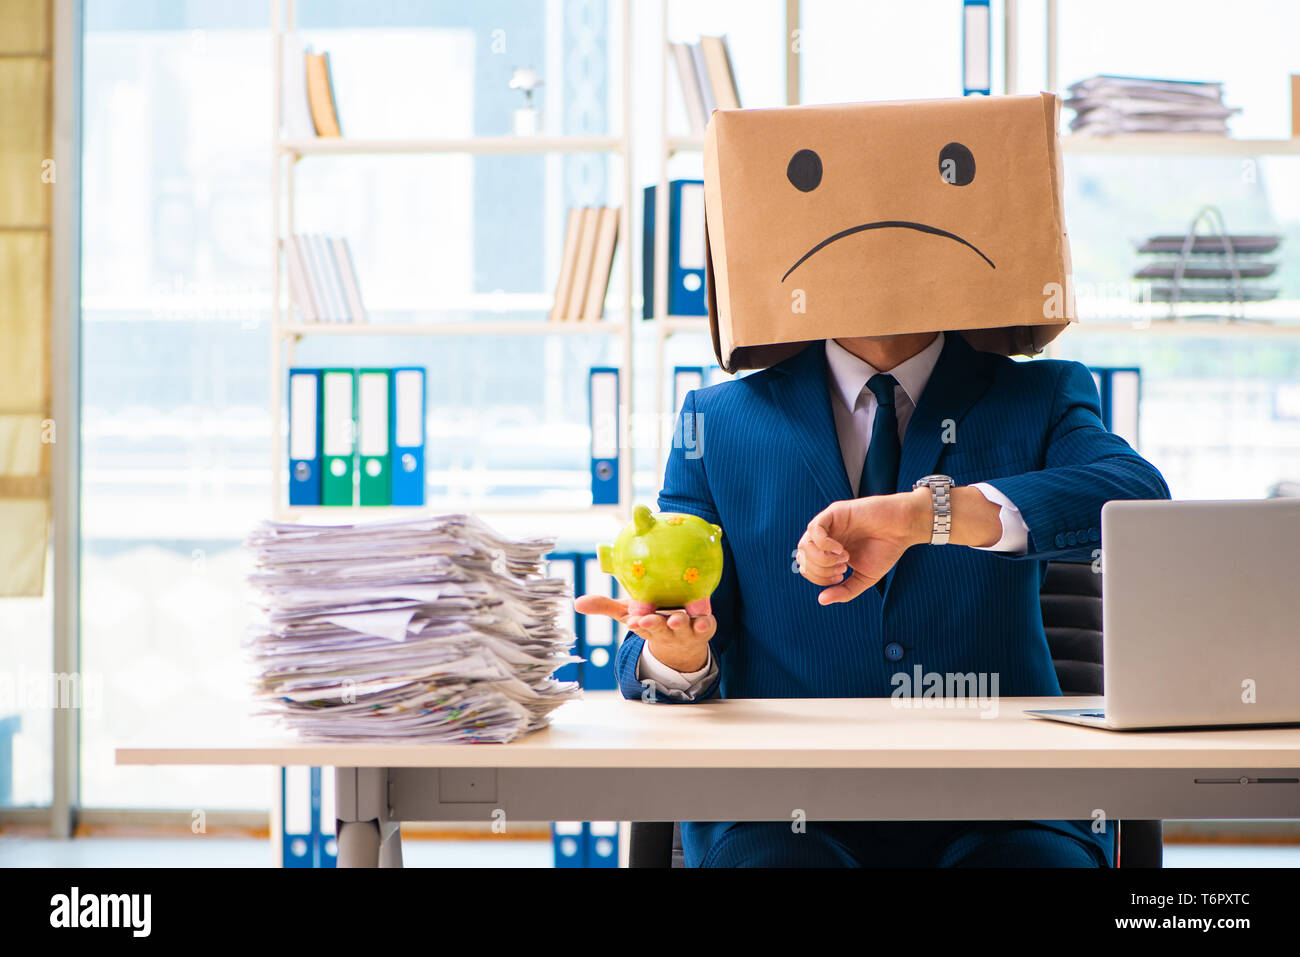 Unhappy man with box instead of his head Stock Photo